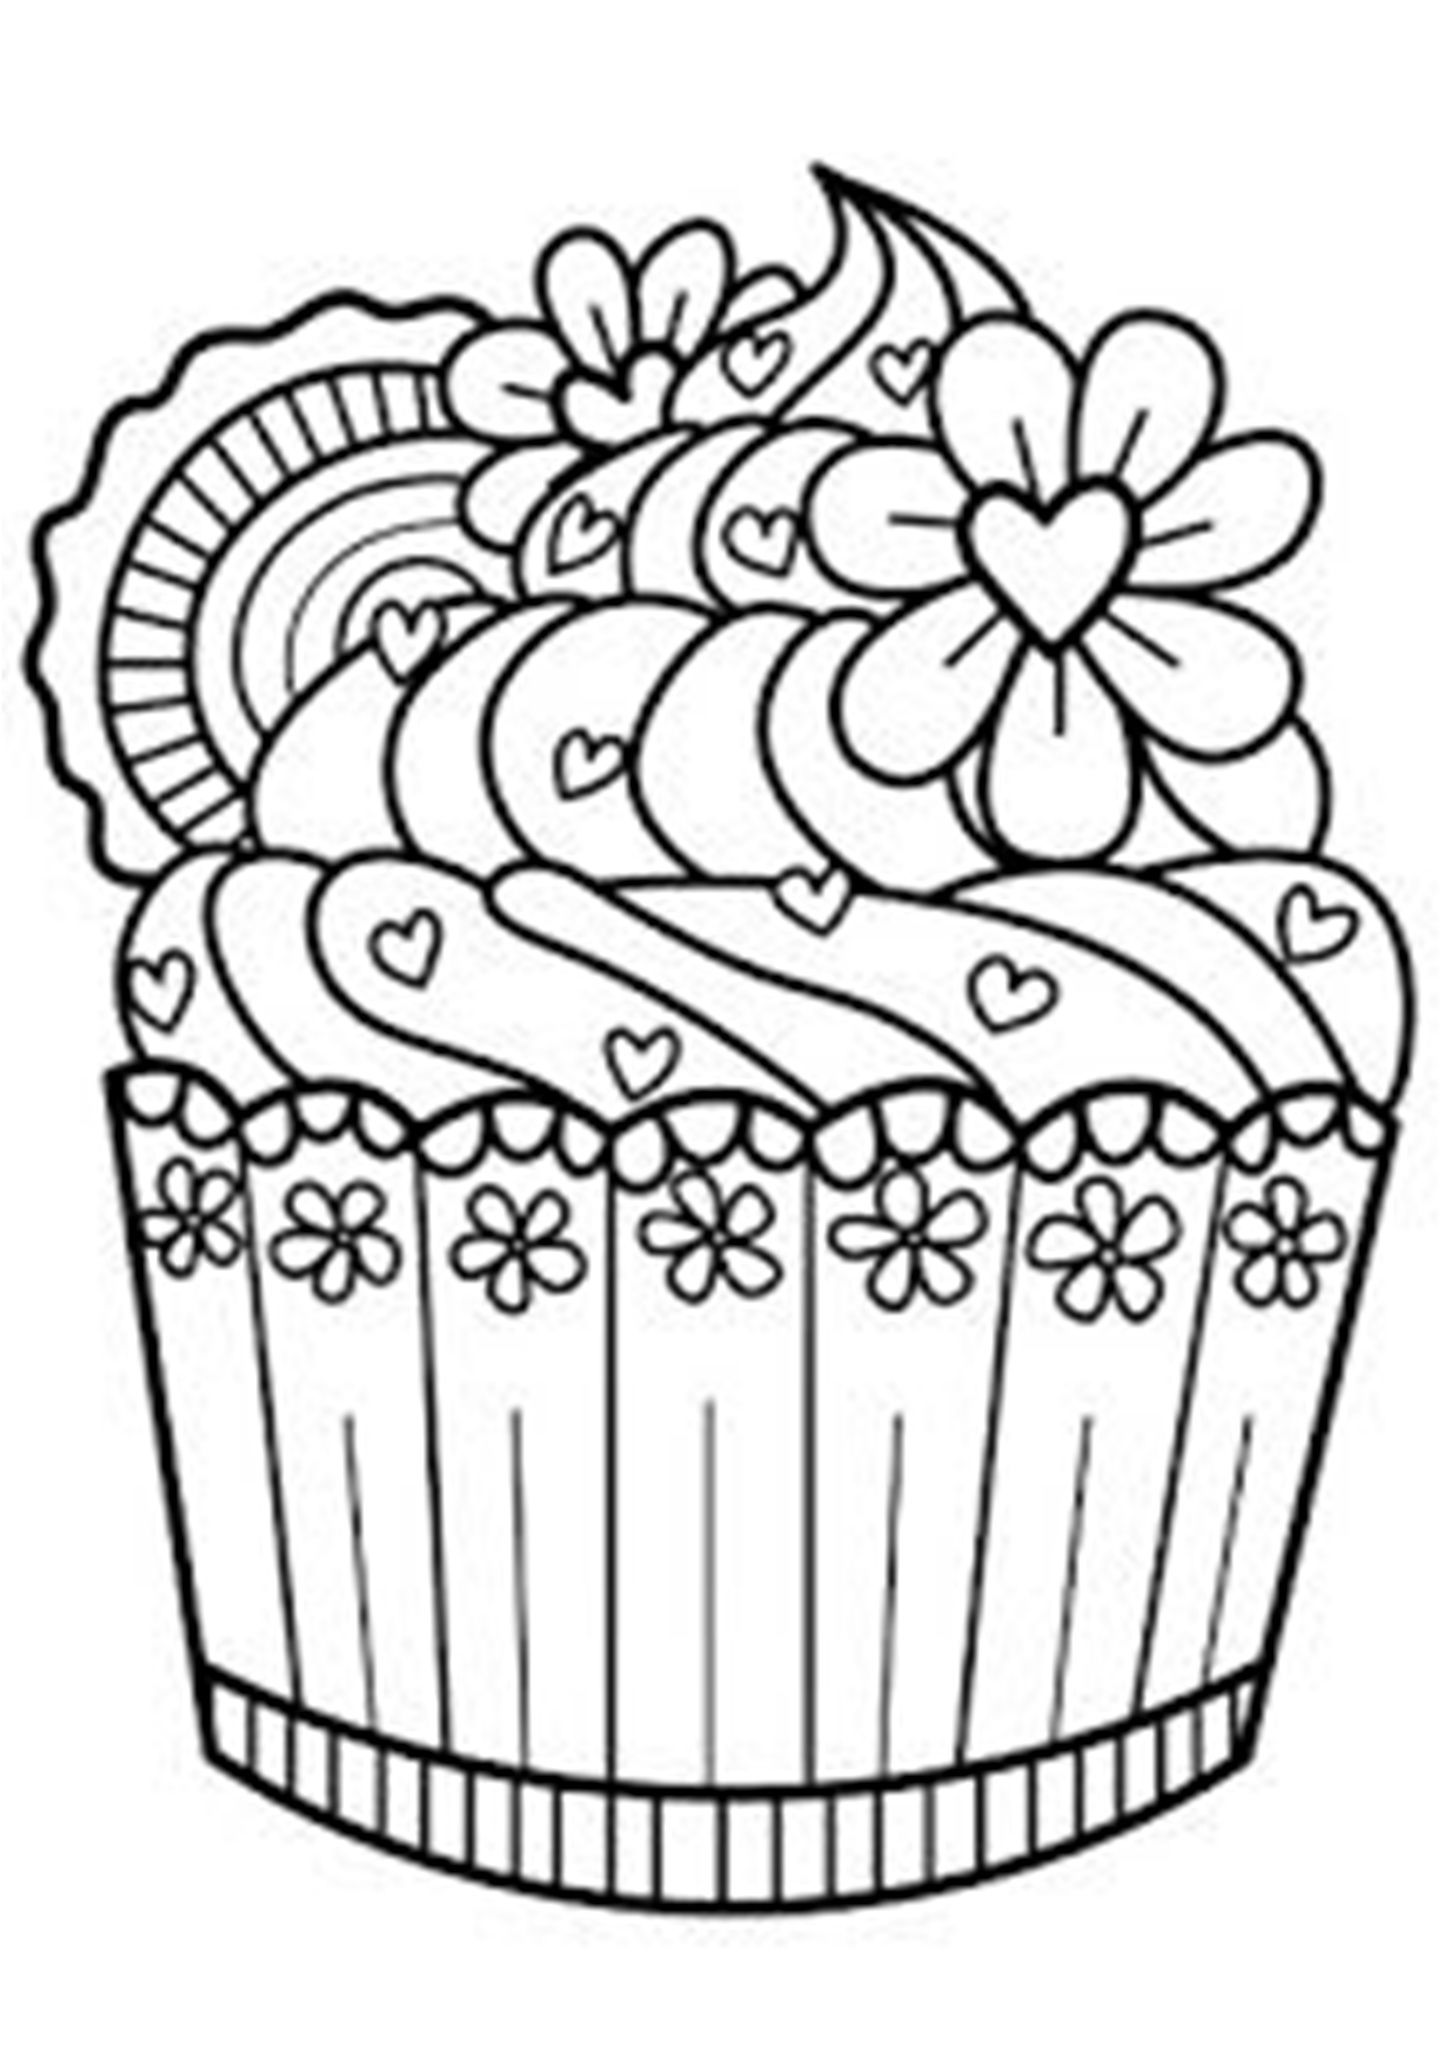 free easy to print cupcake coloring pages